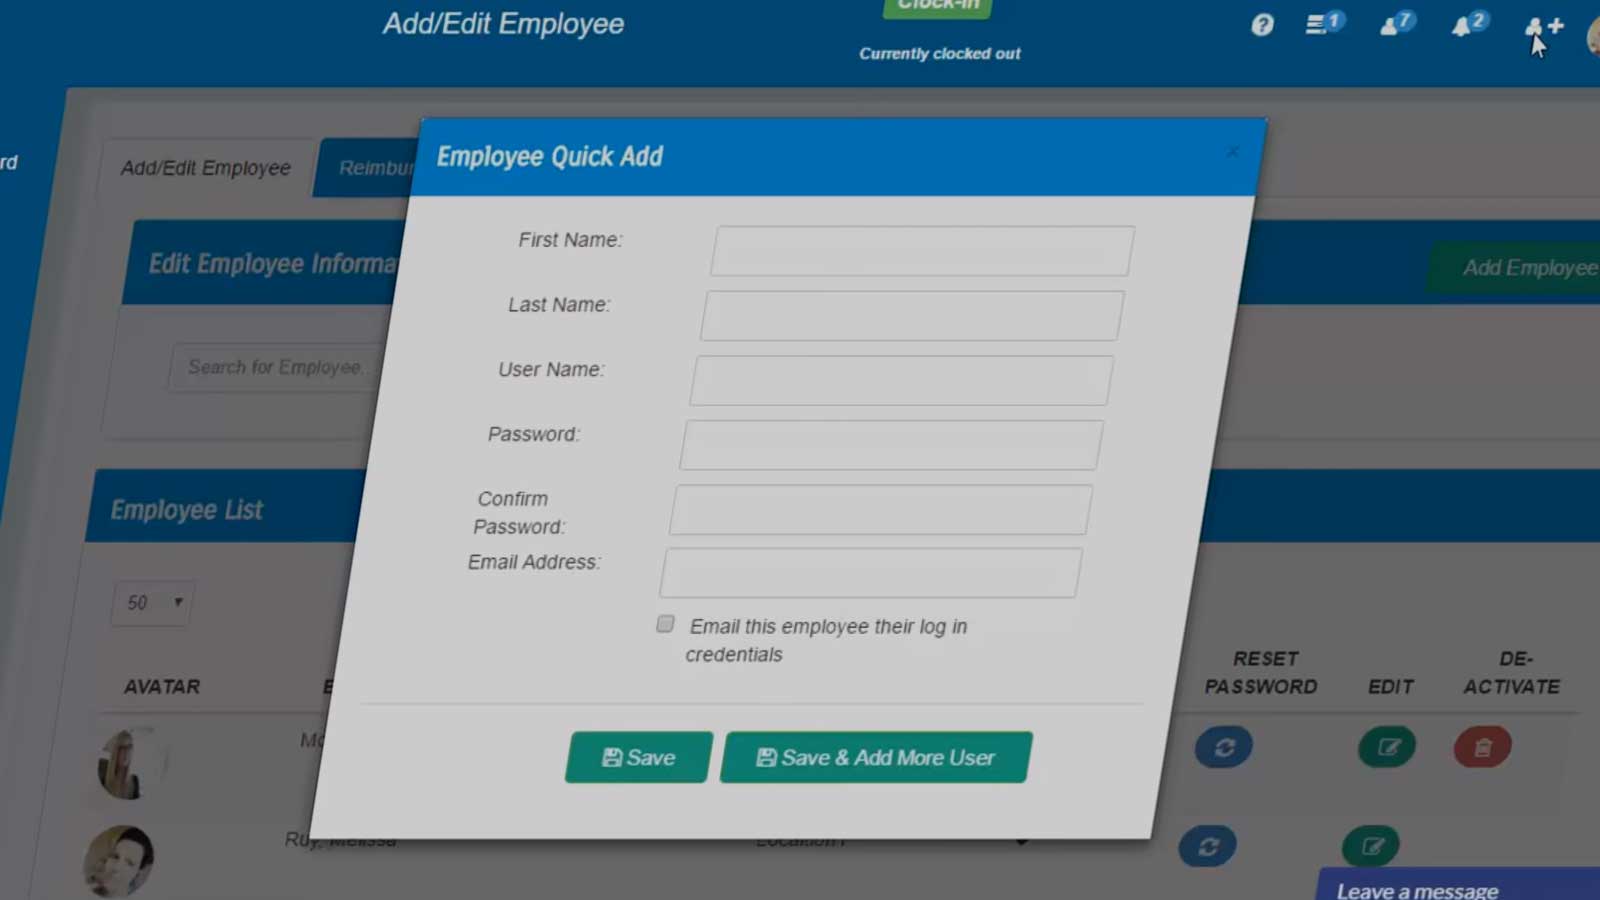 Use Quick Add to Add Employee with Ease